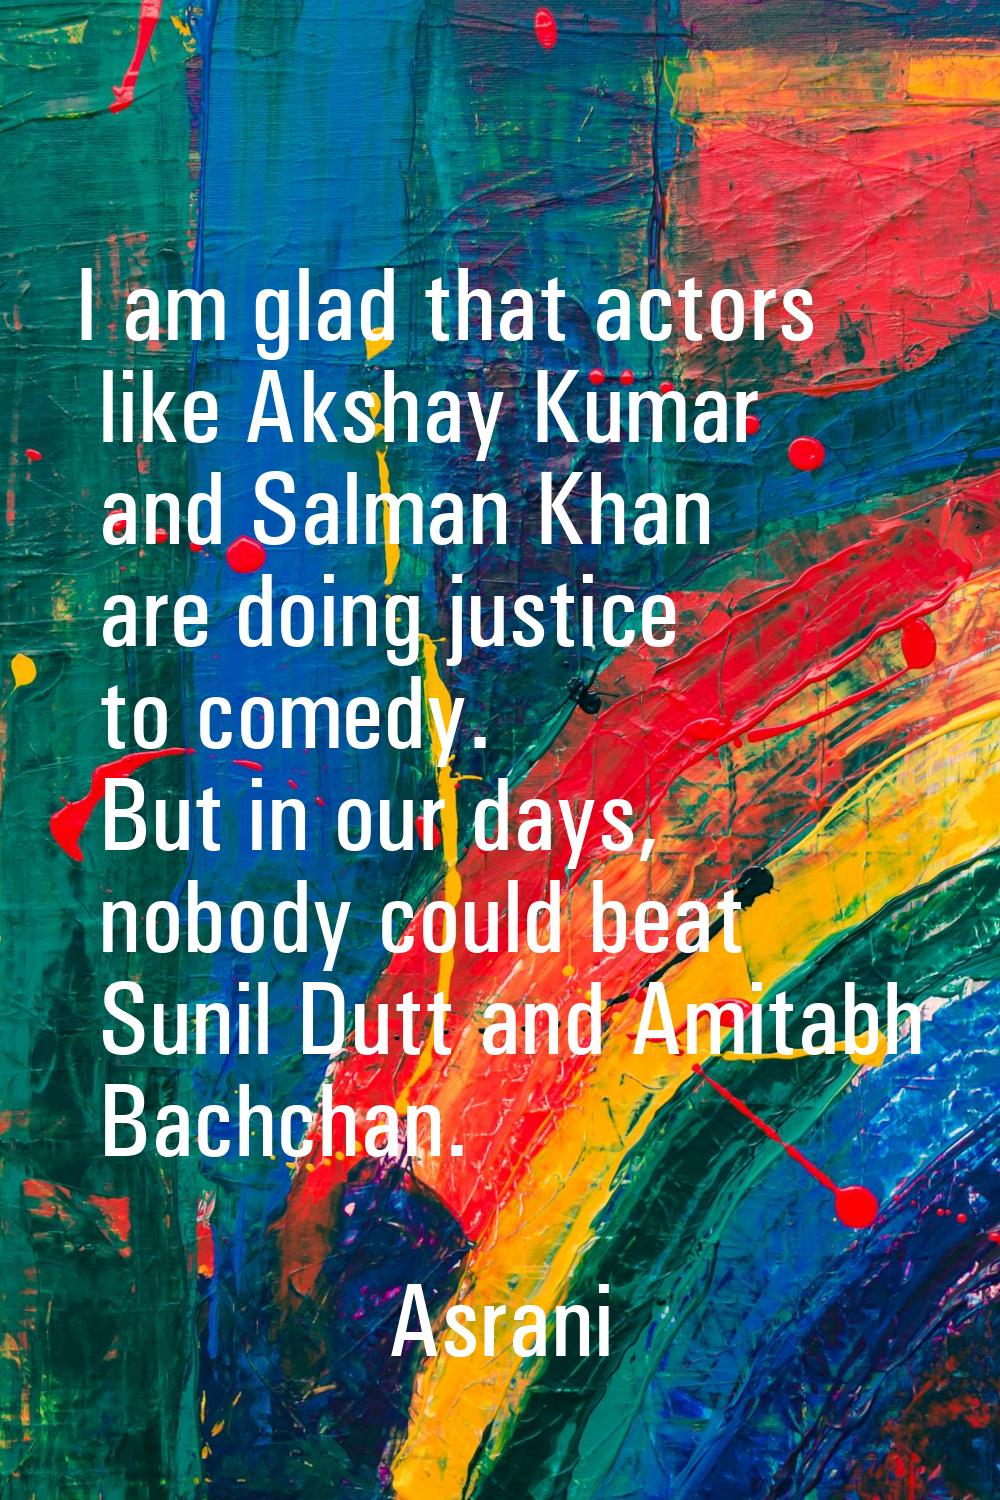 I am glad that actors like Akshay Kumar and Salman Khan are doing justice to comedy. But in our day